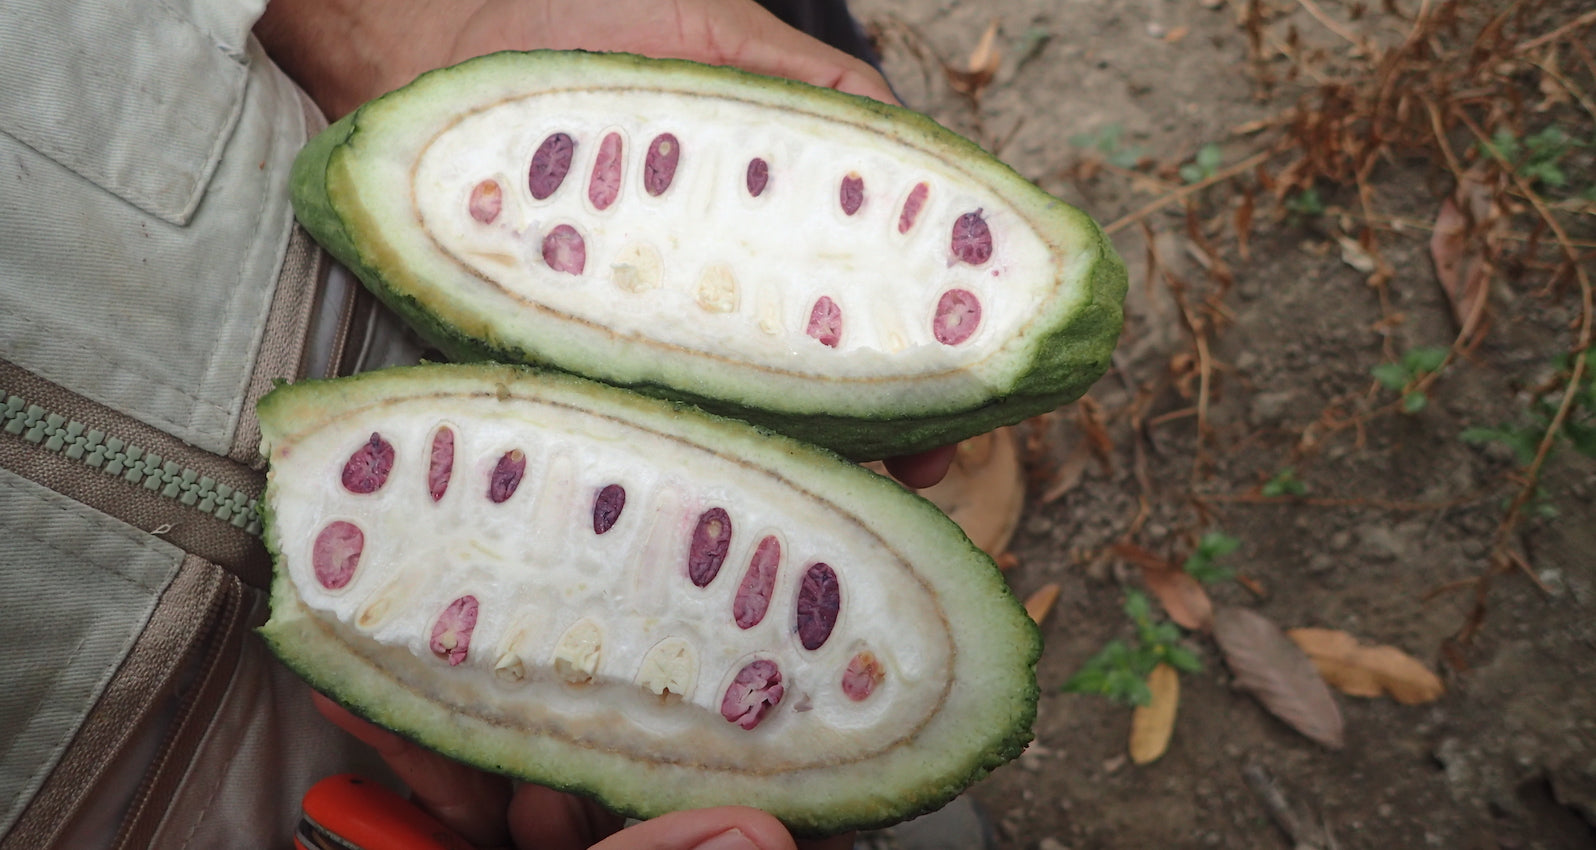 A cacao pod split in two to see interior pulp and beans.